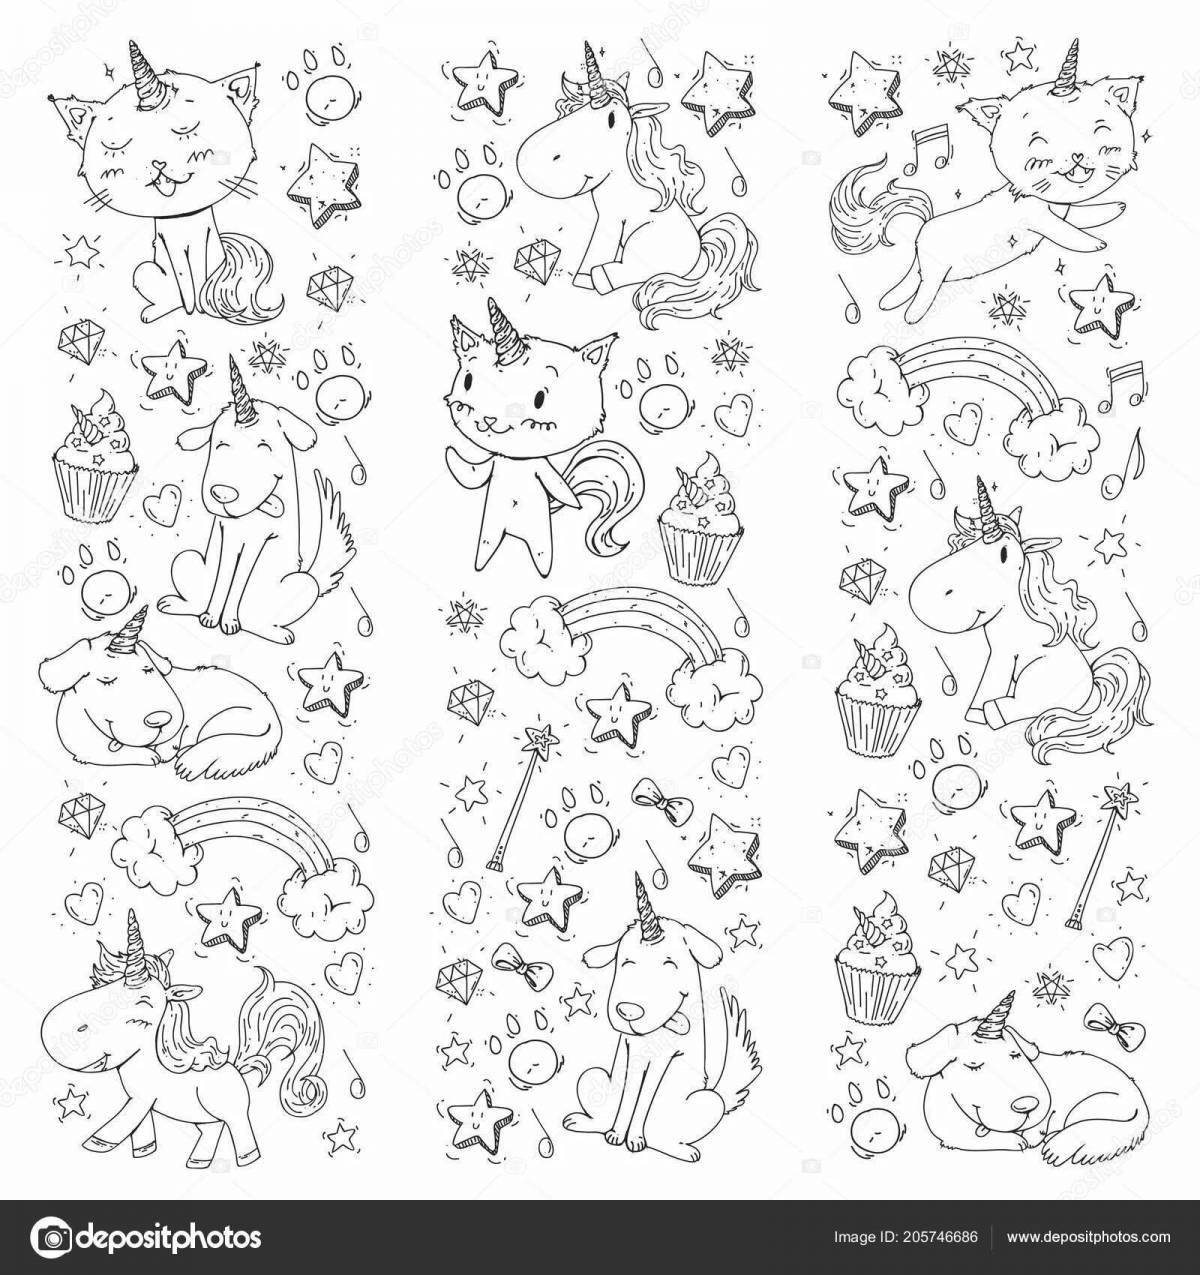 Fun many cats on one page